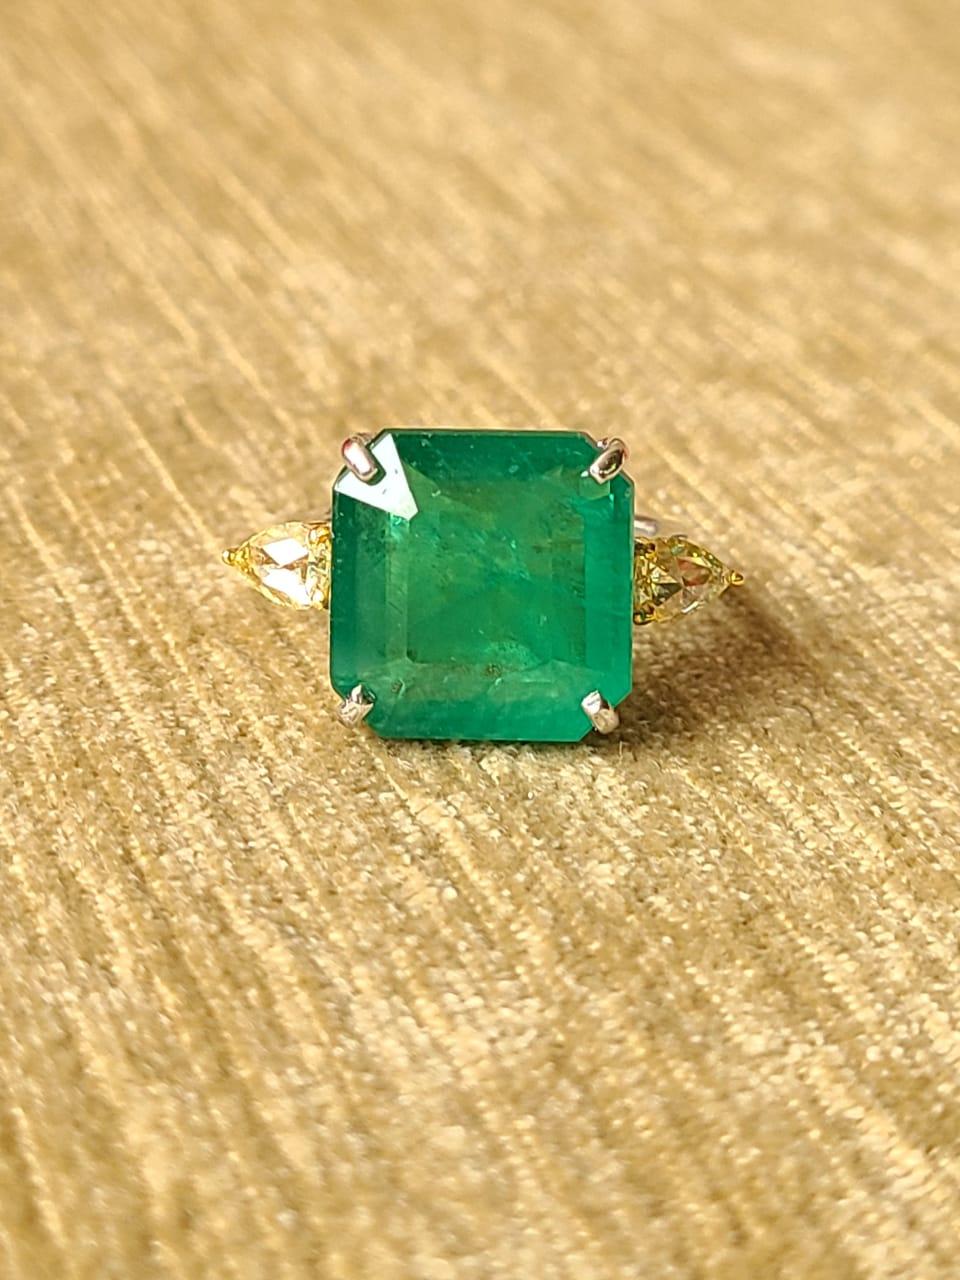 A very gorgeous and one of a kind, Emerald Cocktail/ Engagement Ring set in 18K Gold & Diamonds. The weight of the Emerald is 10.68 carats. The Emerald is completely natural, without any treatment and is of Zambian origin. The combined weight of the